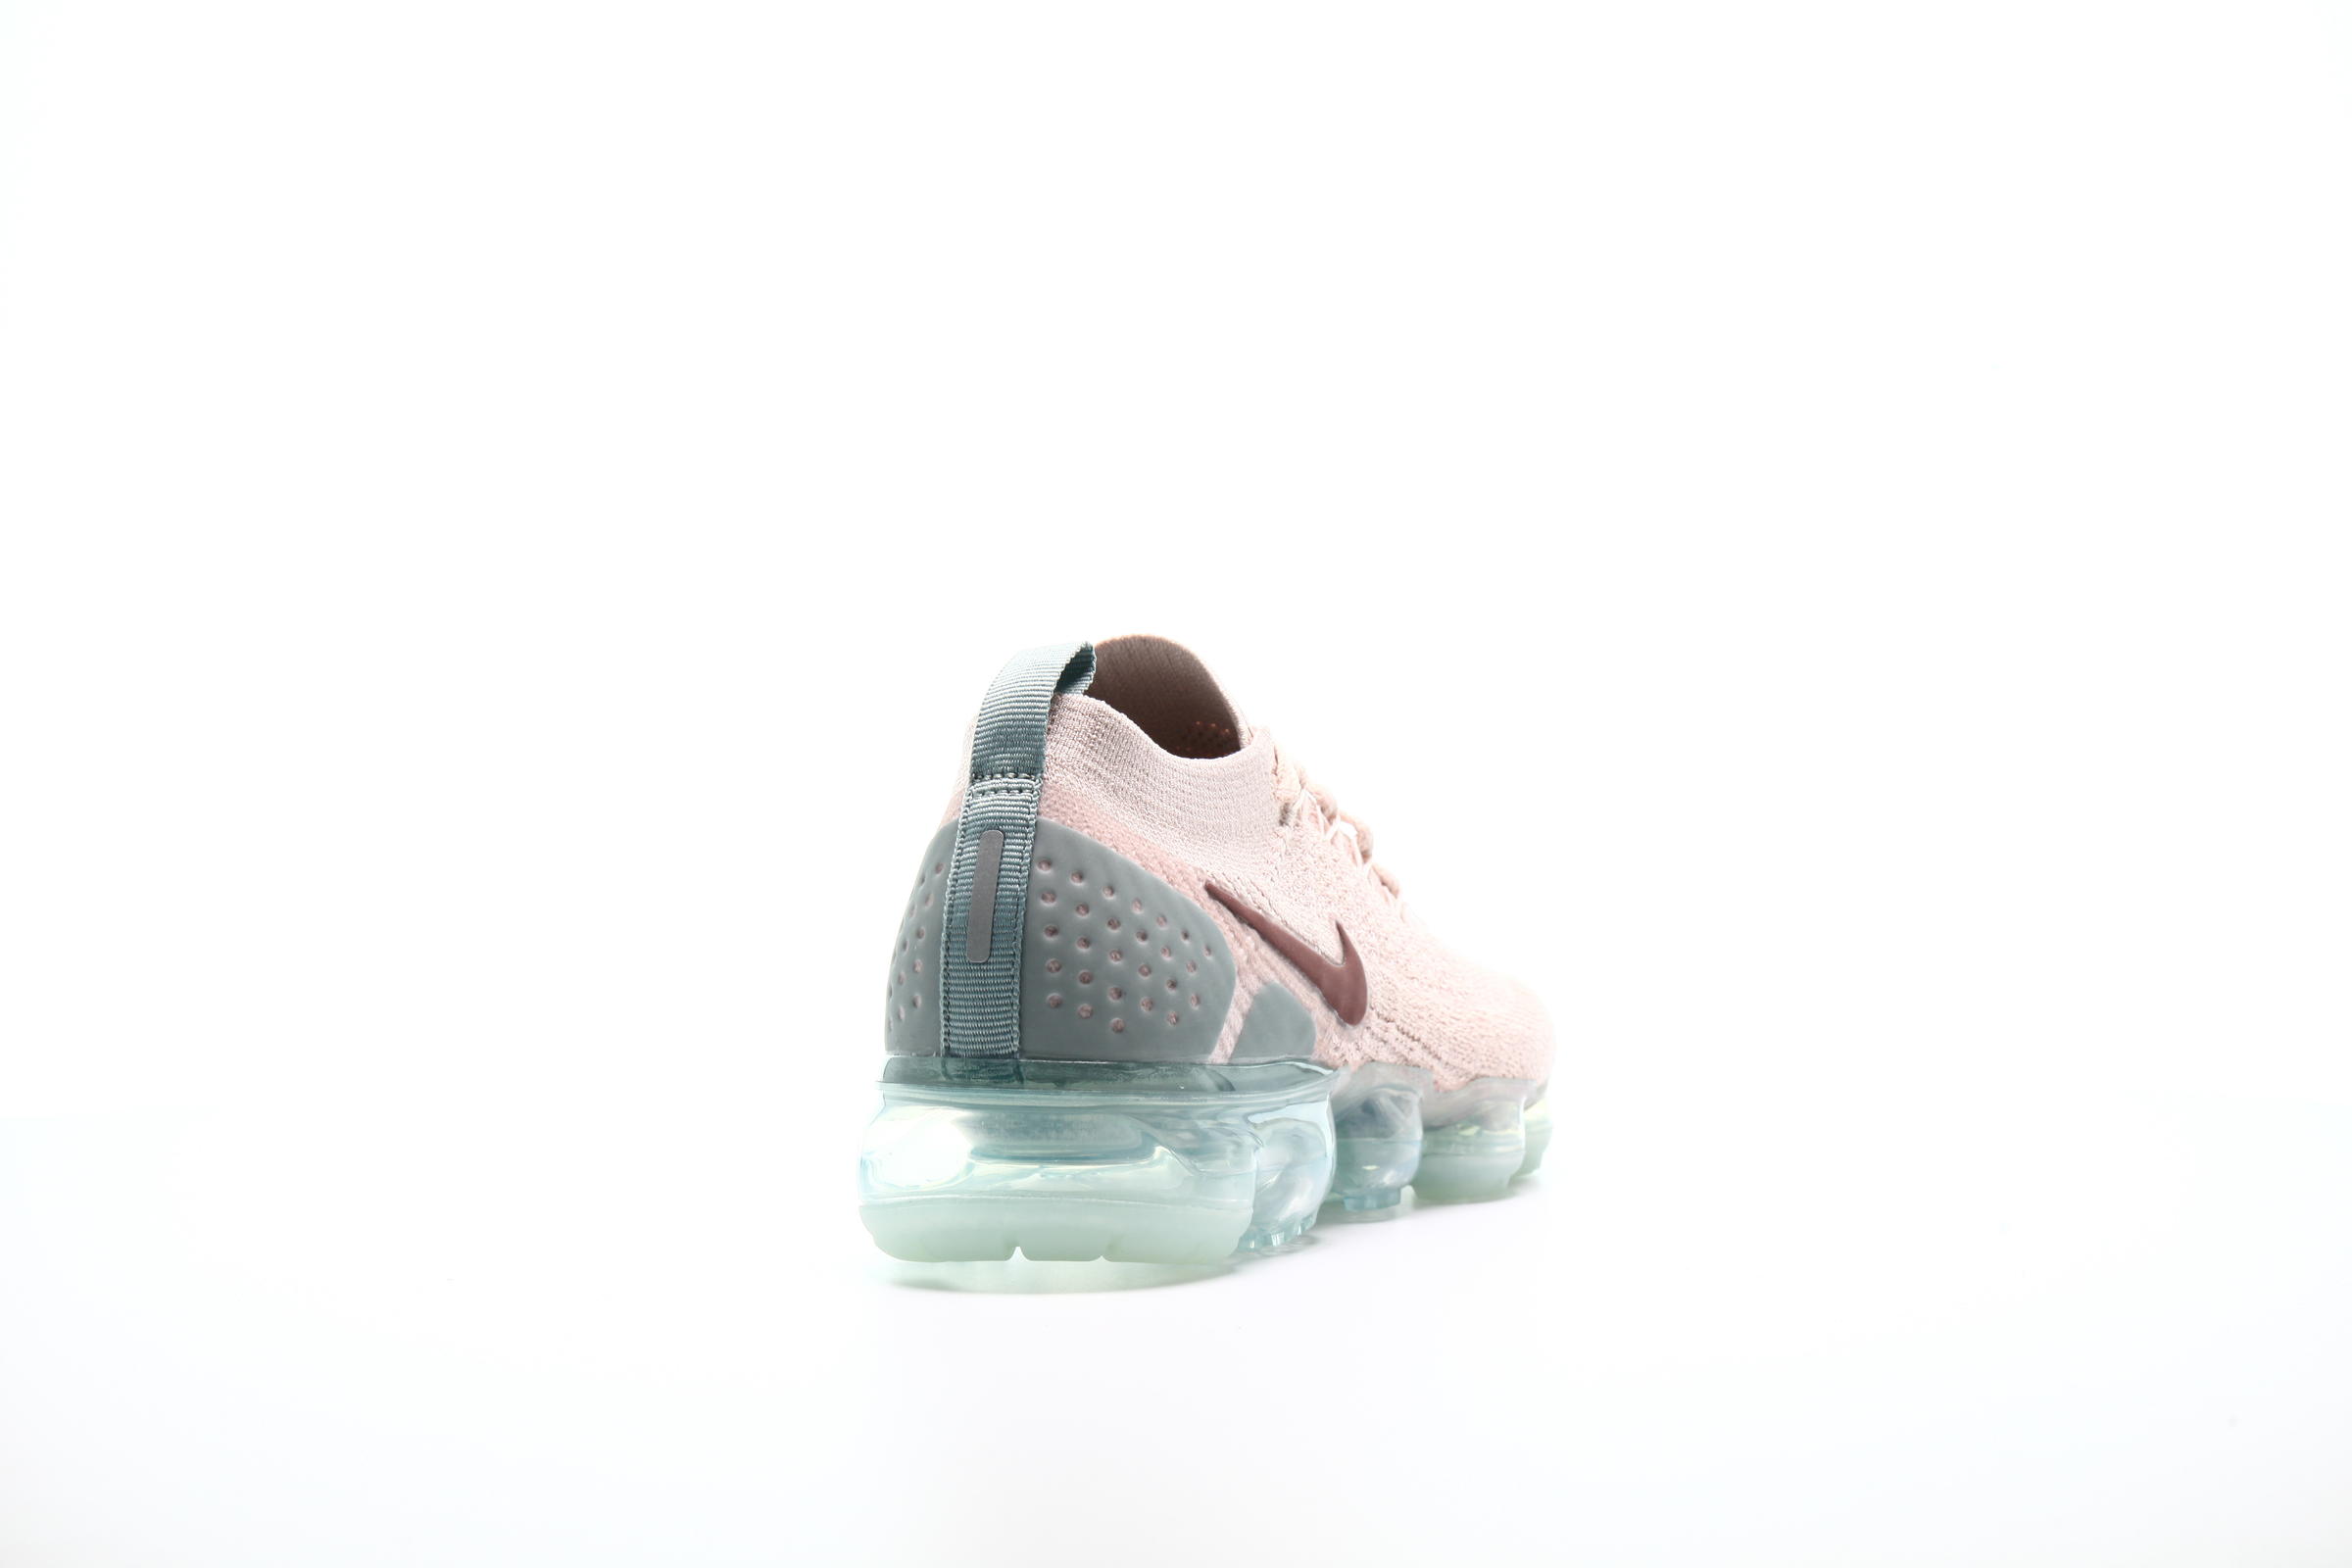 Nike Wmns Air VaporMax Flyknit 2 "Particle Beige"